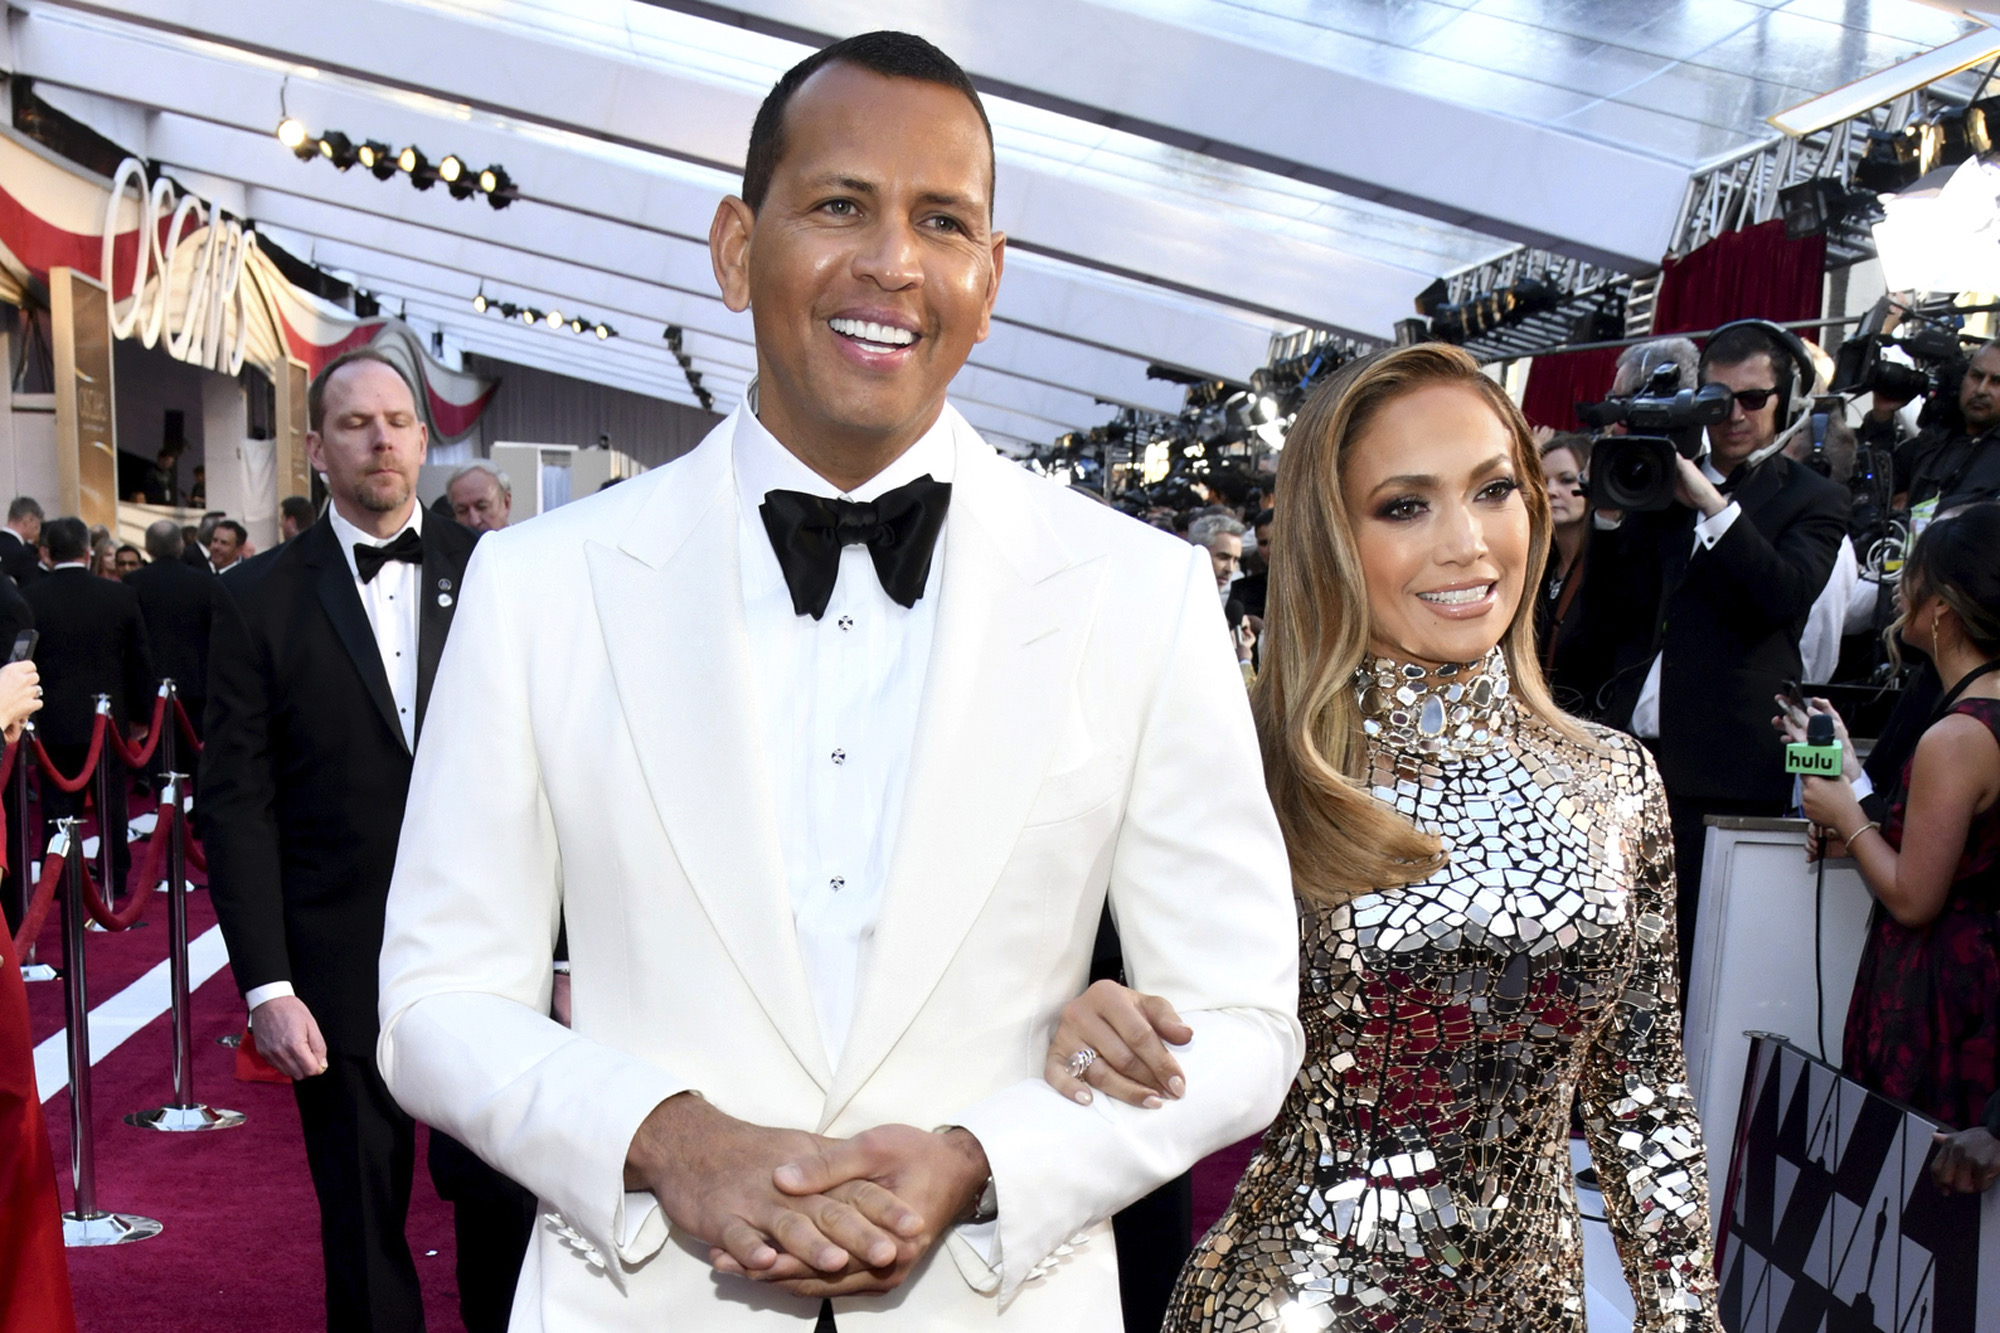 Jennifer Lopez And Alex Rodriguez Say They Are Still Together, But 'Working Through Some Things'